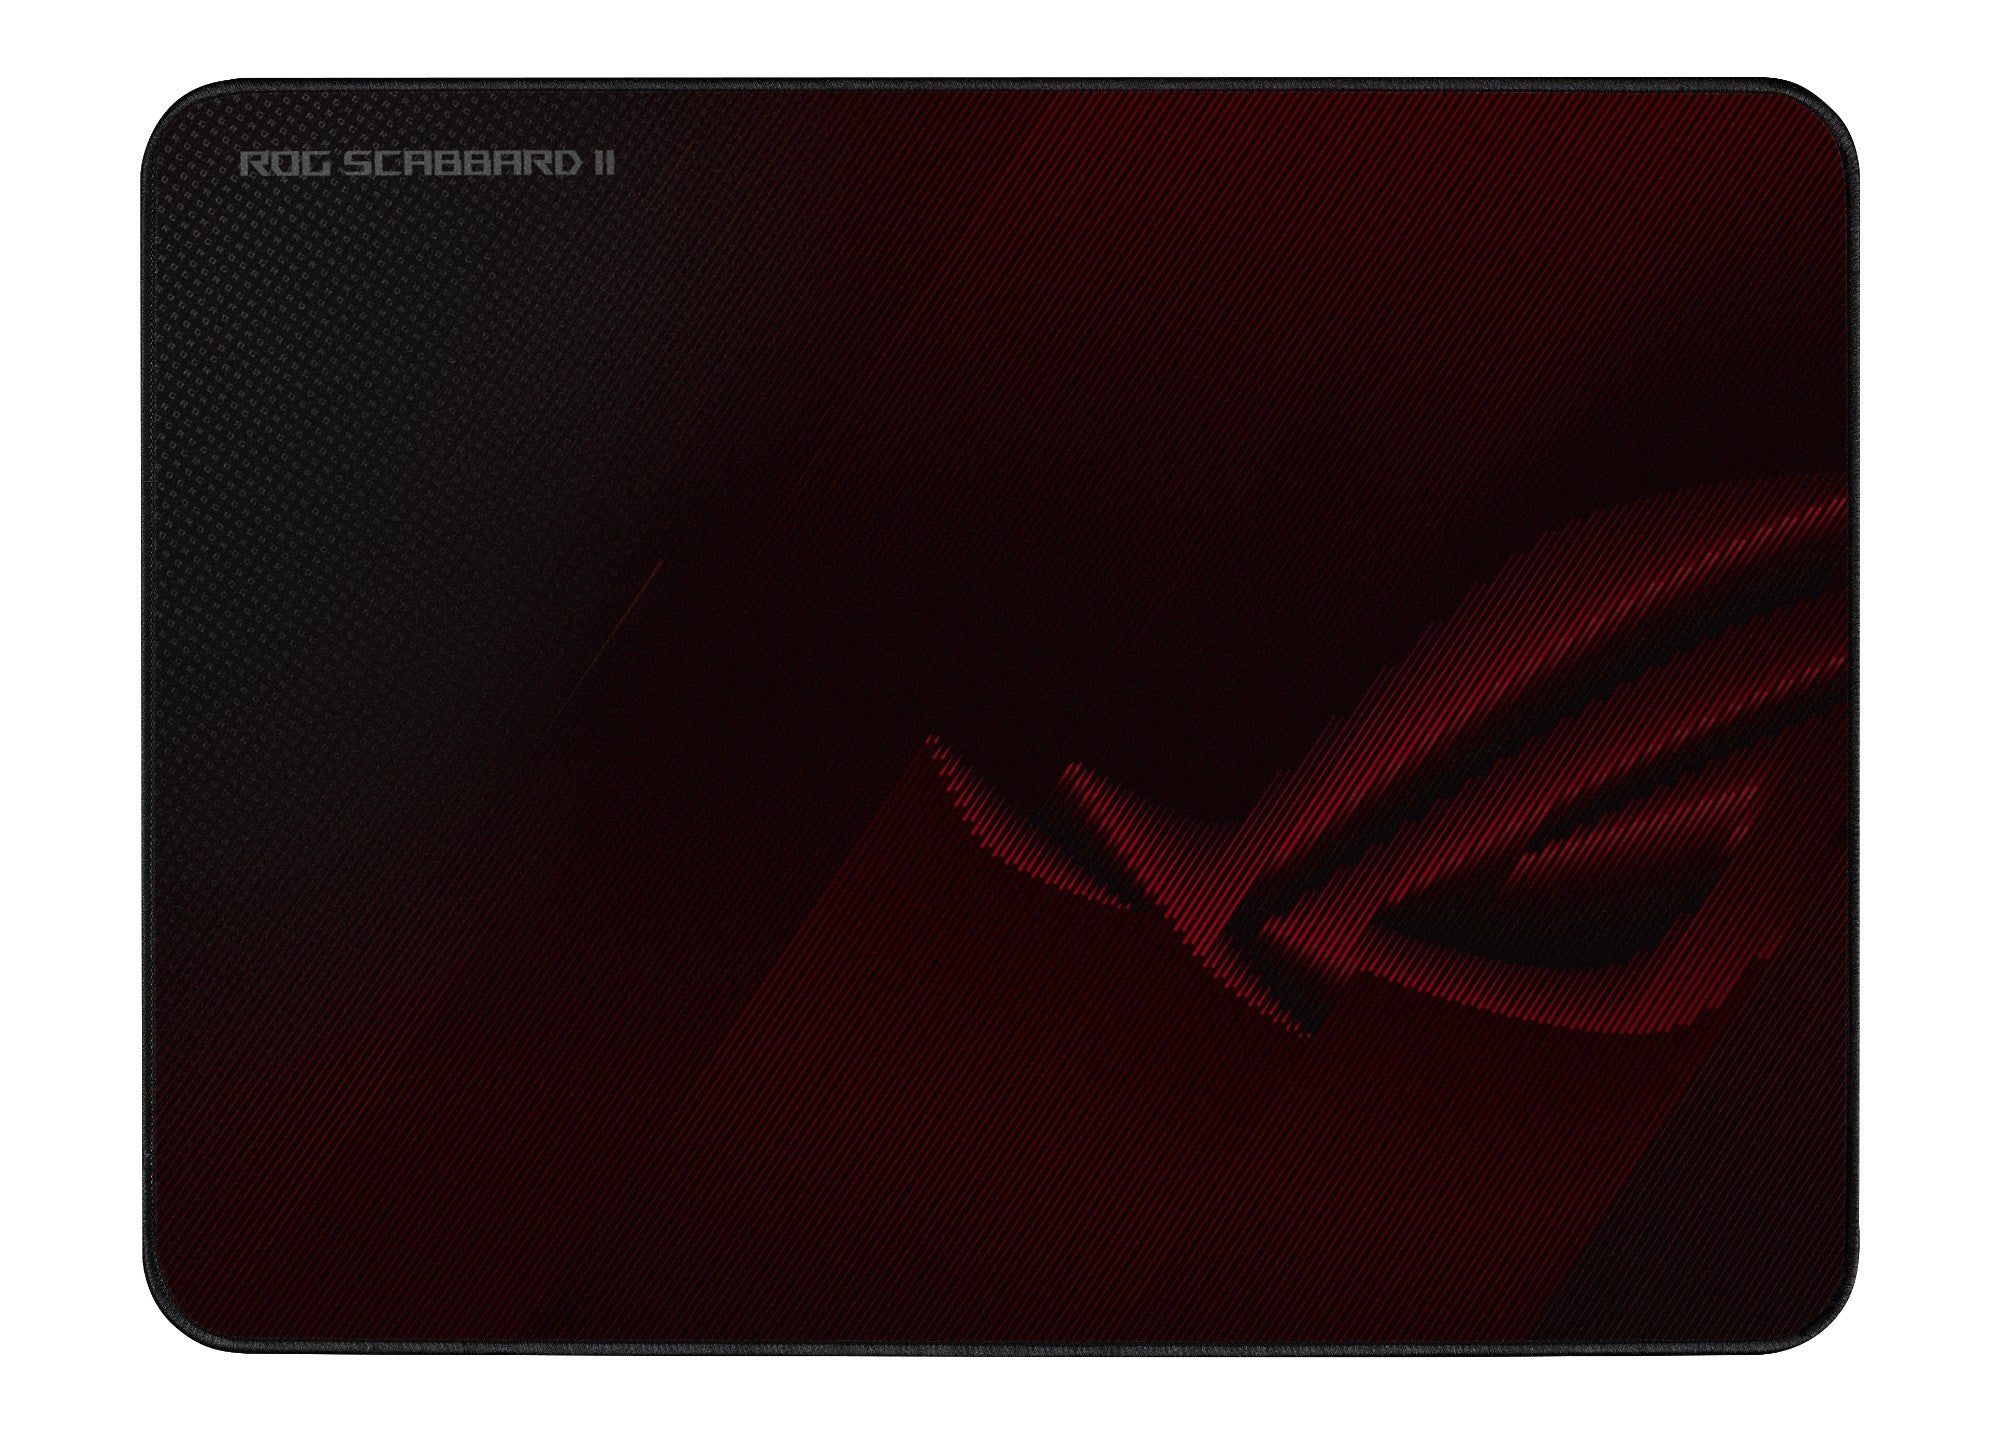 ASUS Rog Scabbard Ii Gaming Mouse Pad Red-(90MP02H0-BPUA00)